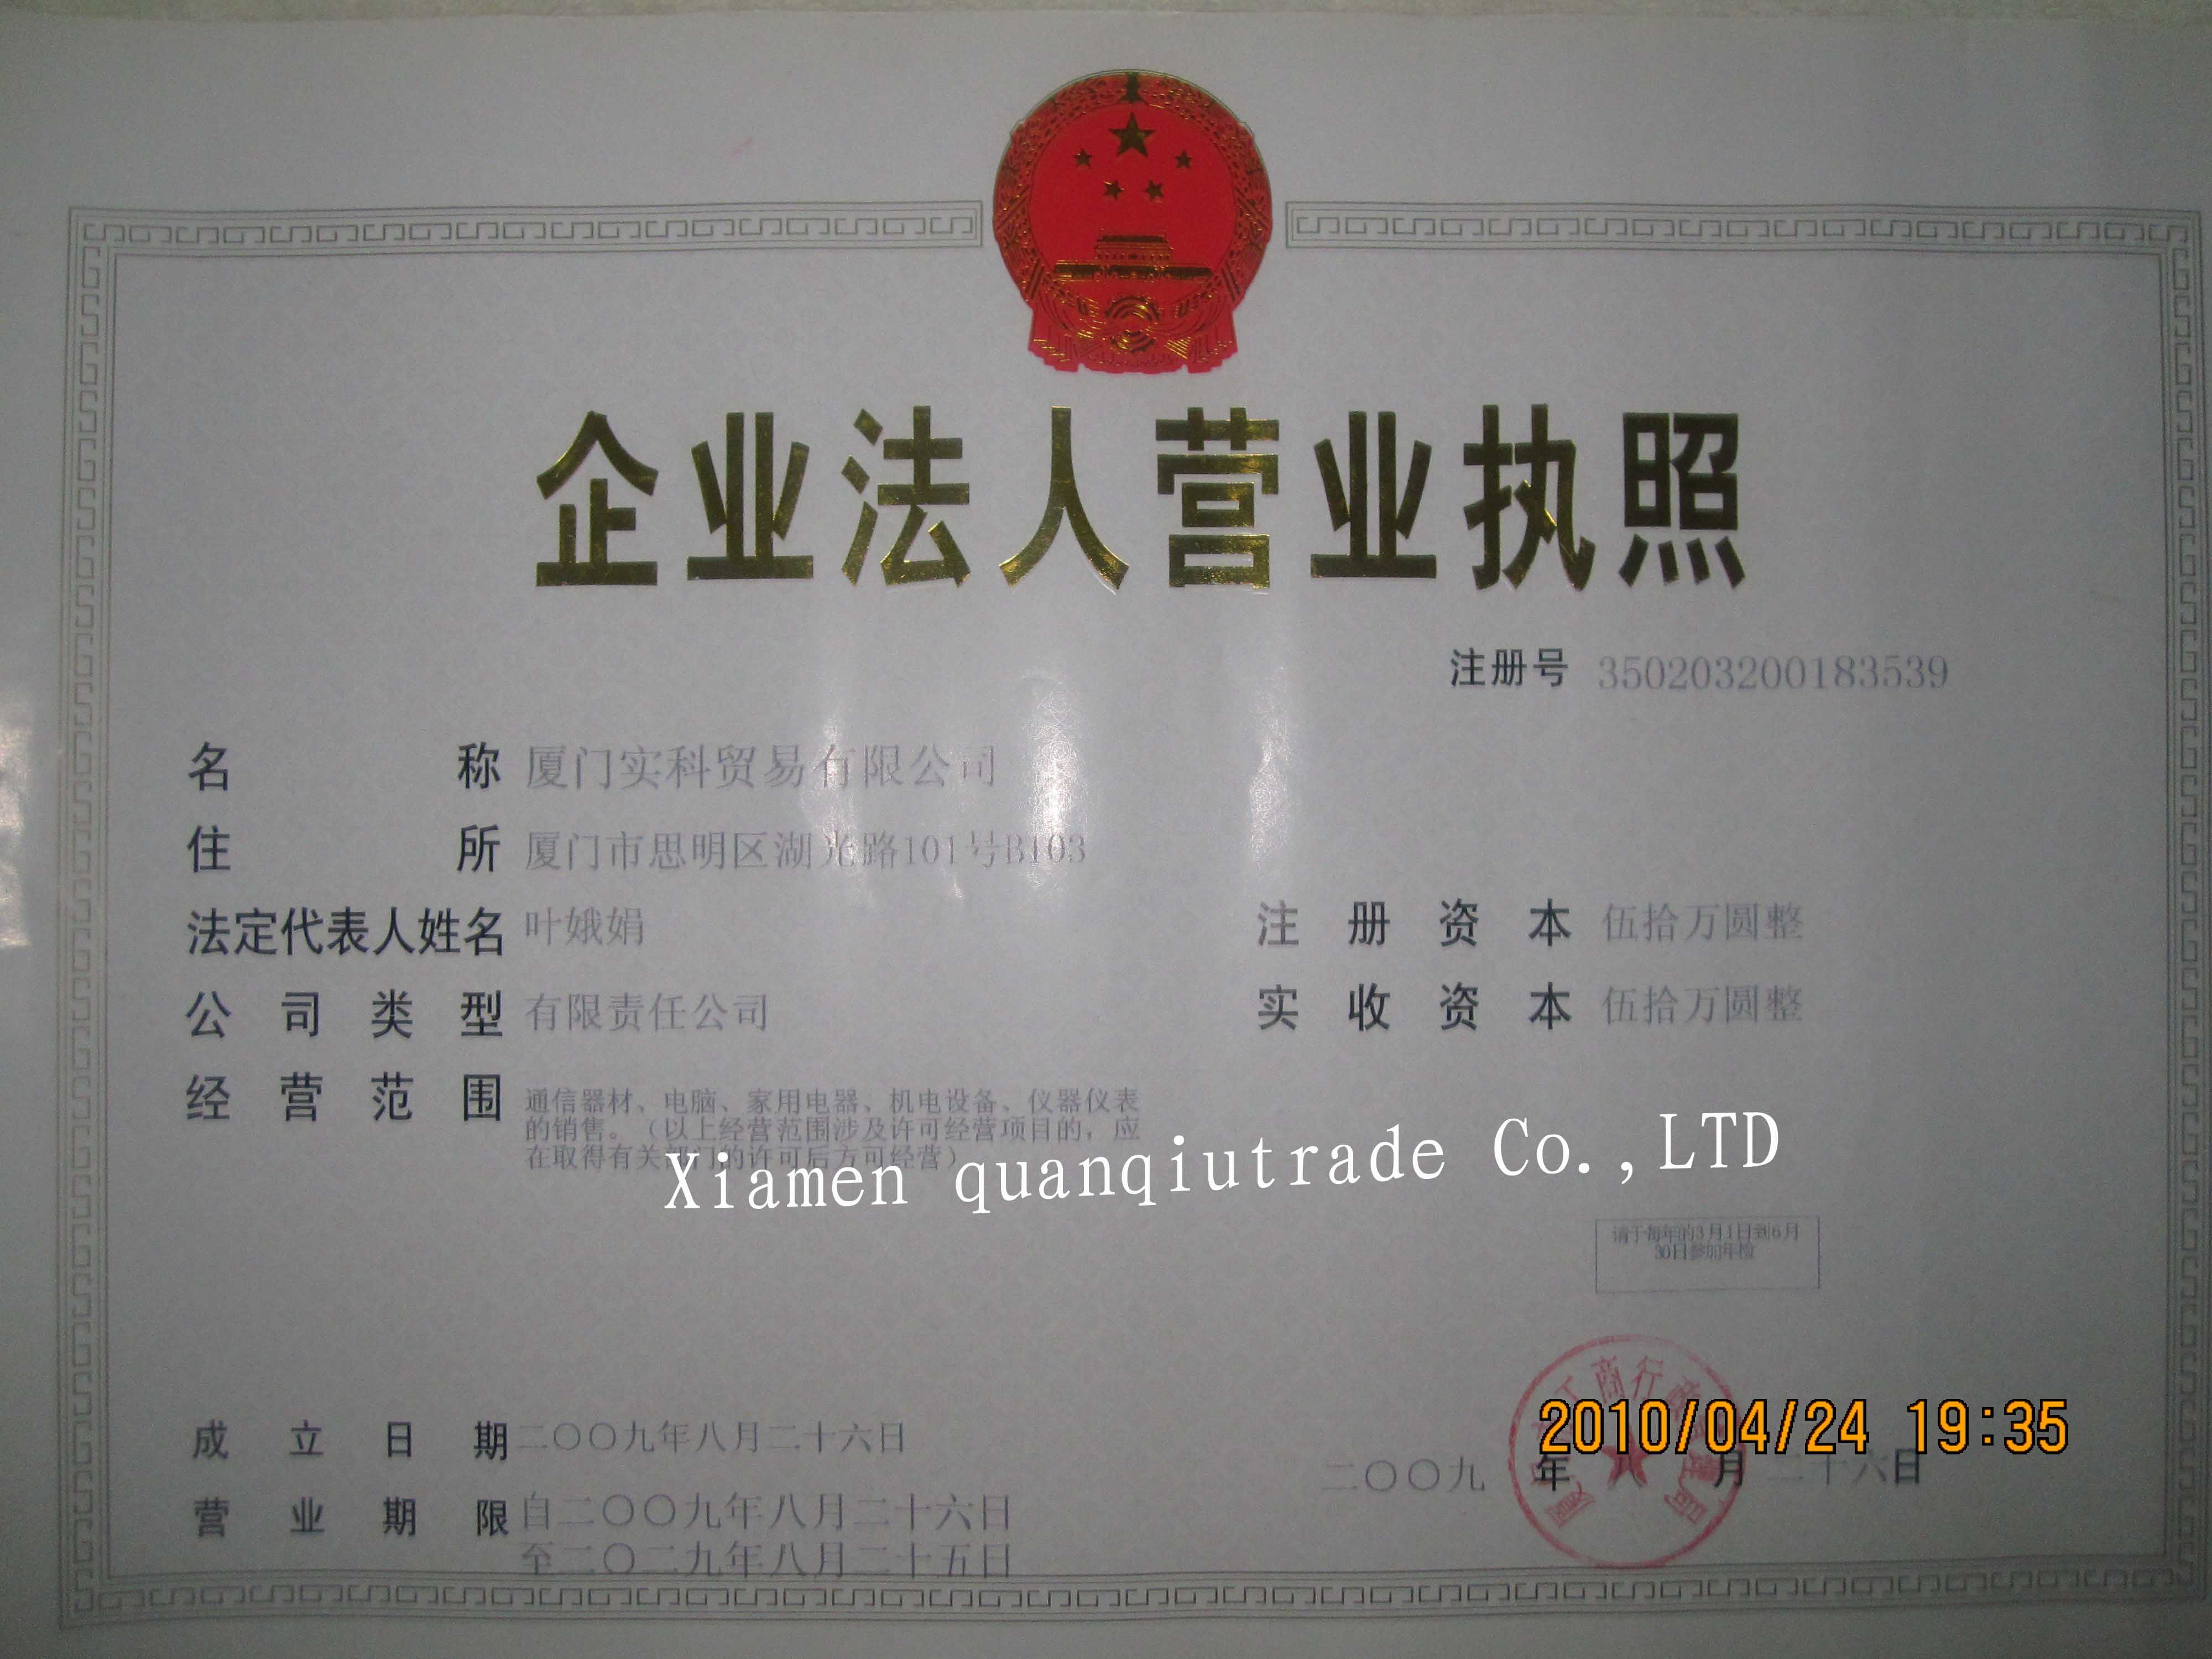 Image of the guys business license.